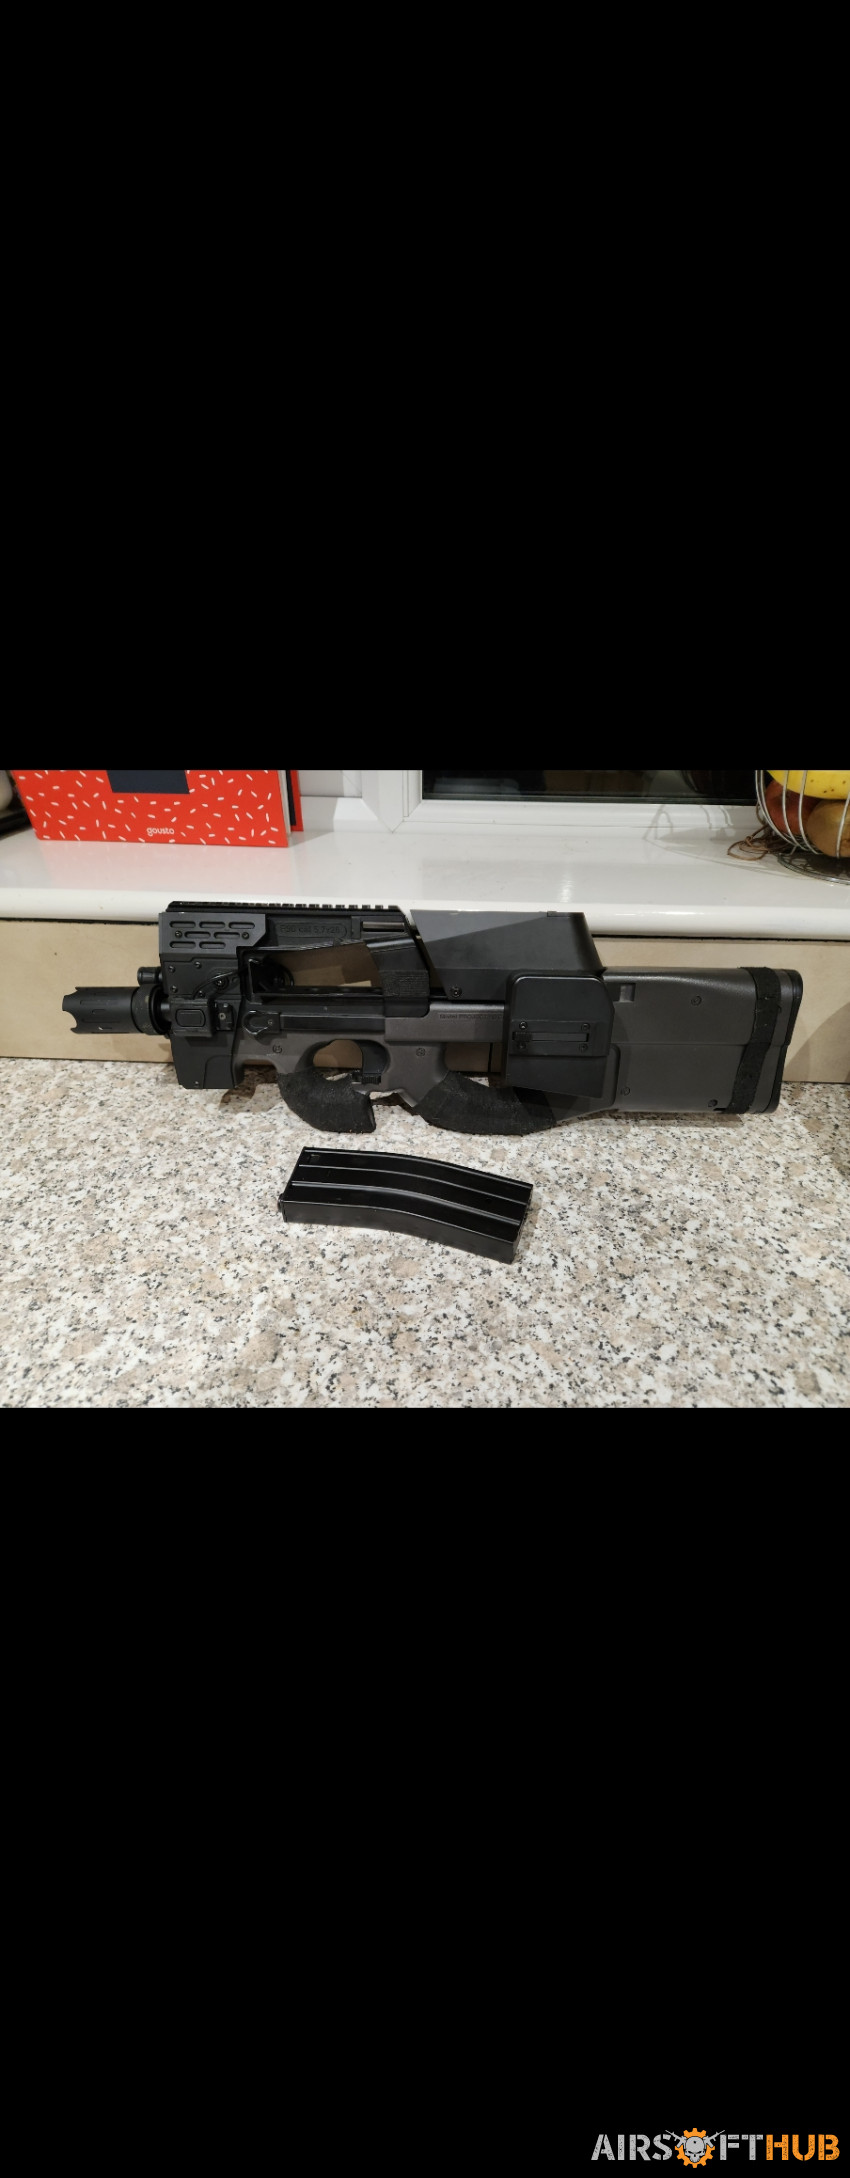 Upgraded Tokyo Marui P90 - Used airsoft equipment